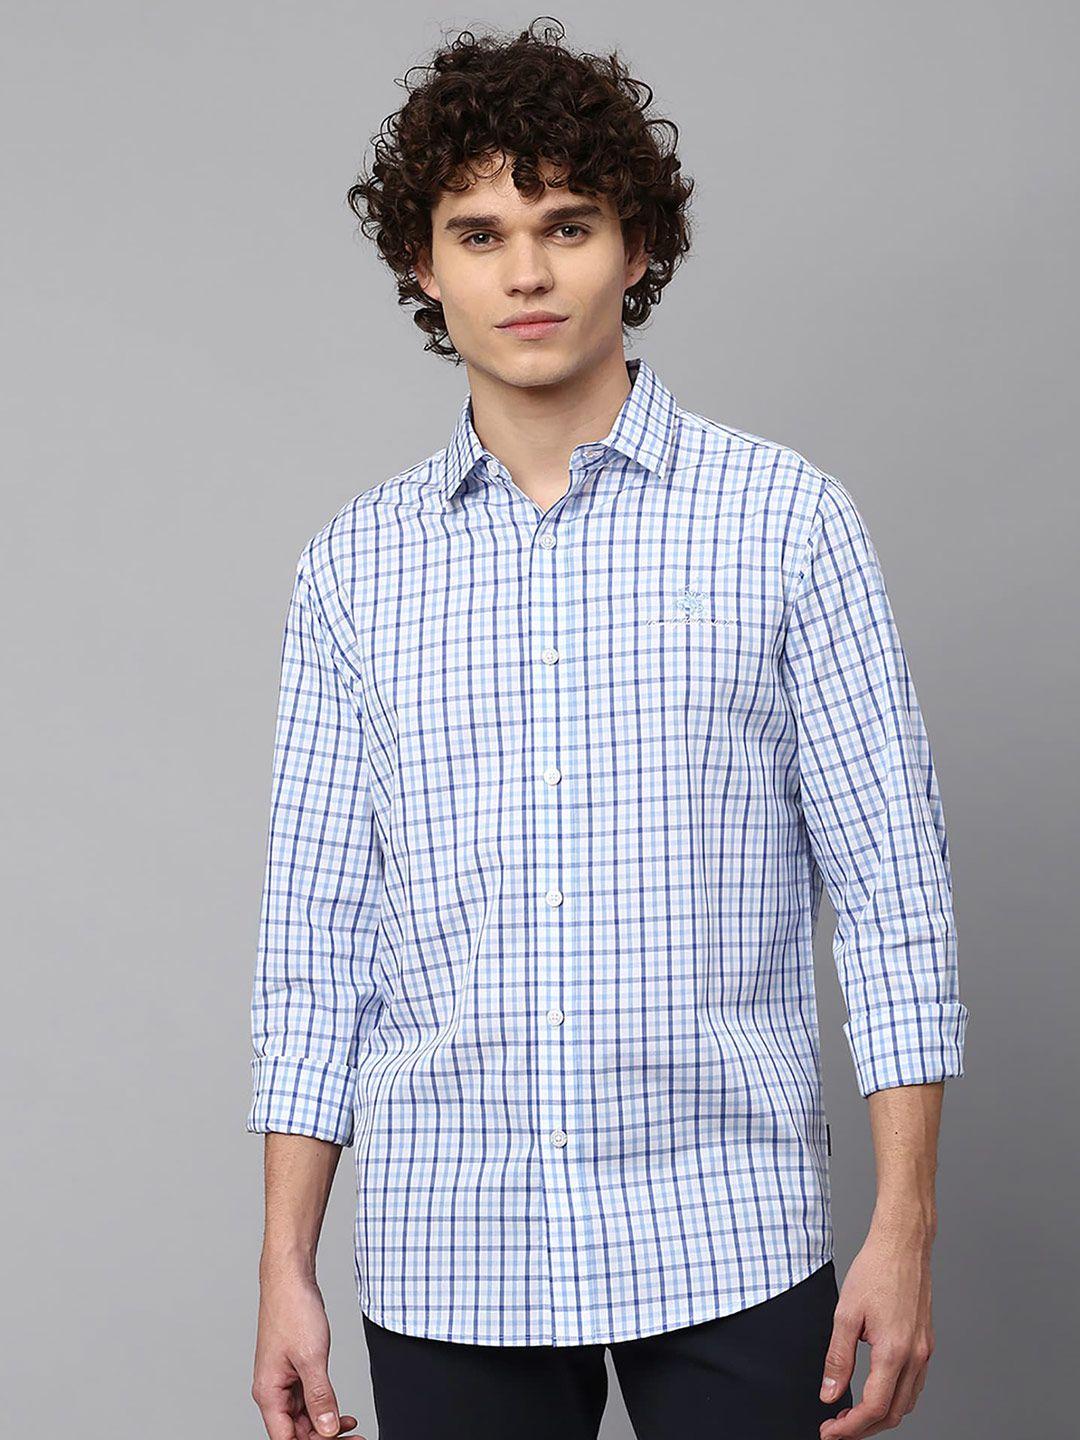 beverly hills polo club men grid tattersall checked casual cotton shirt